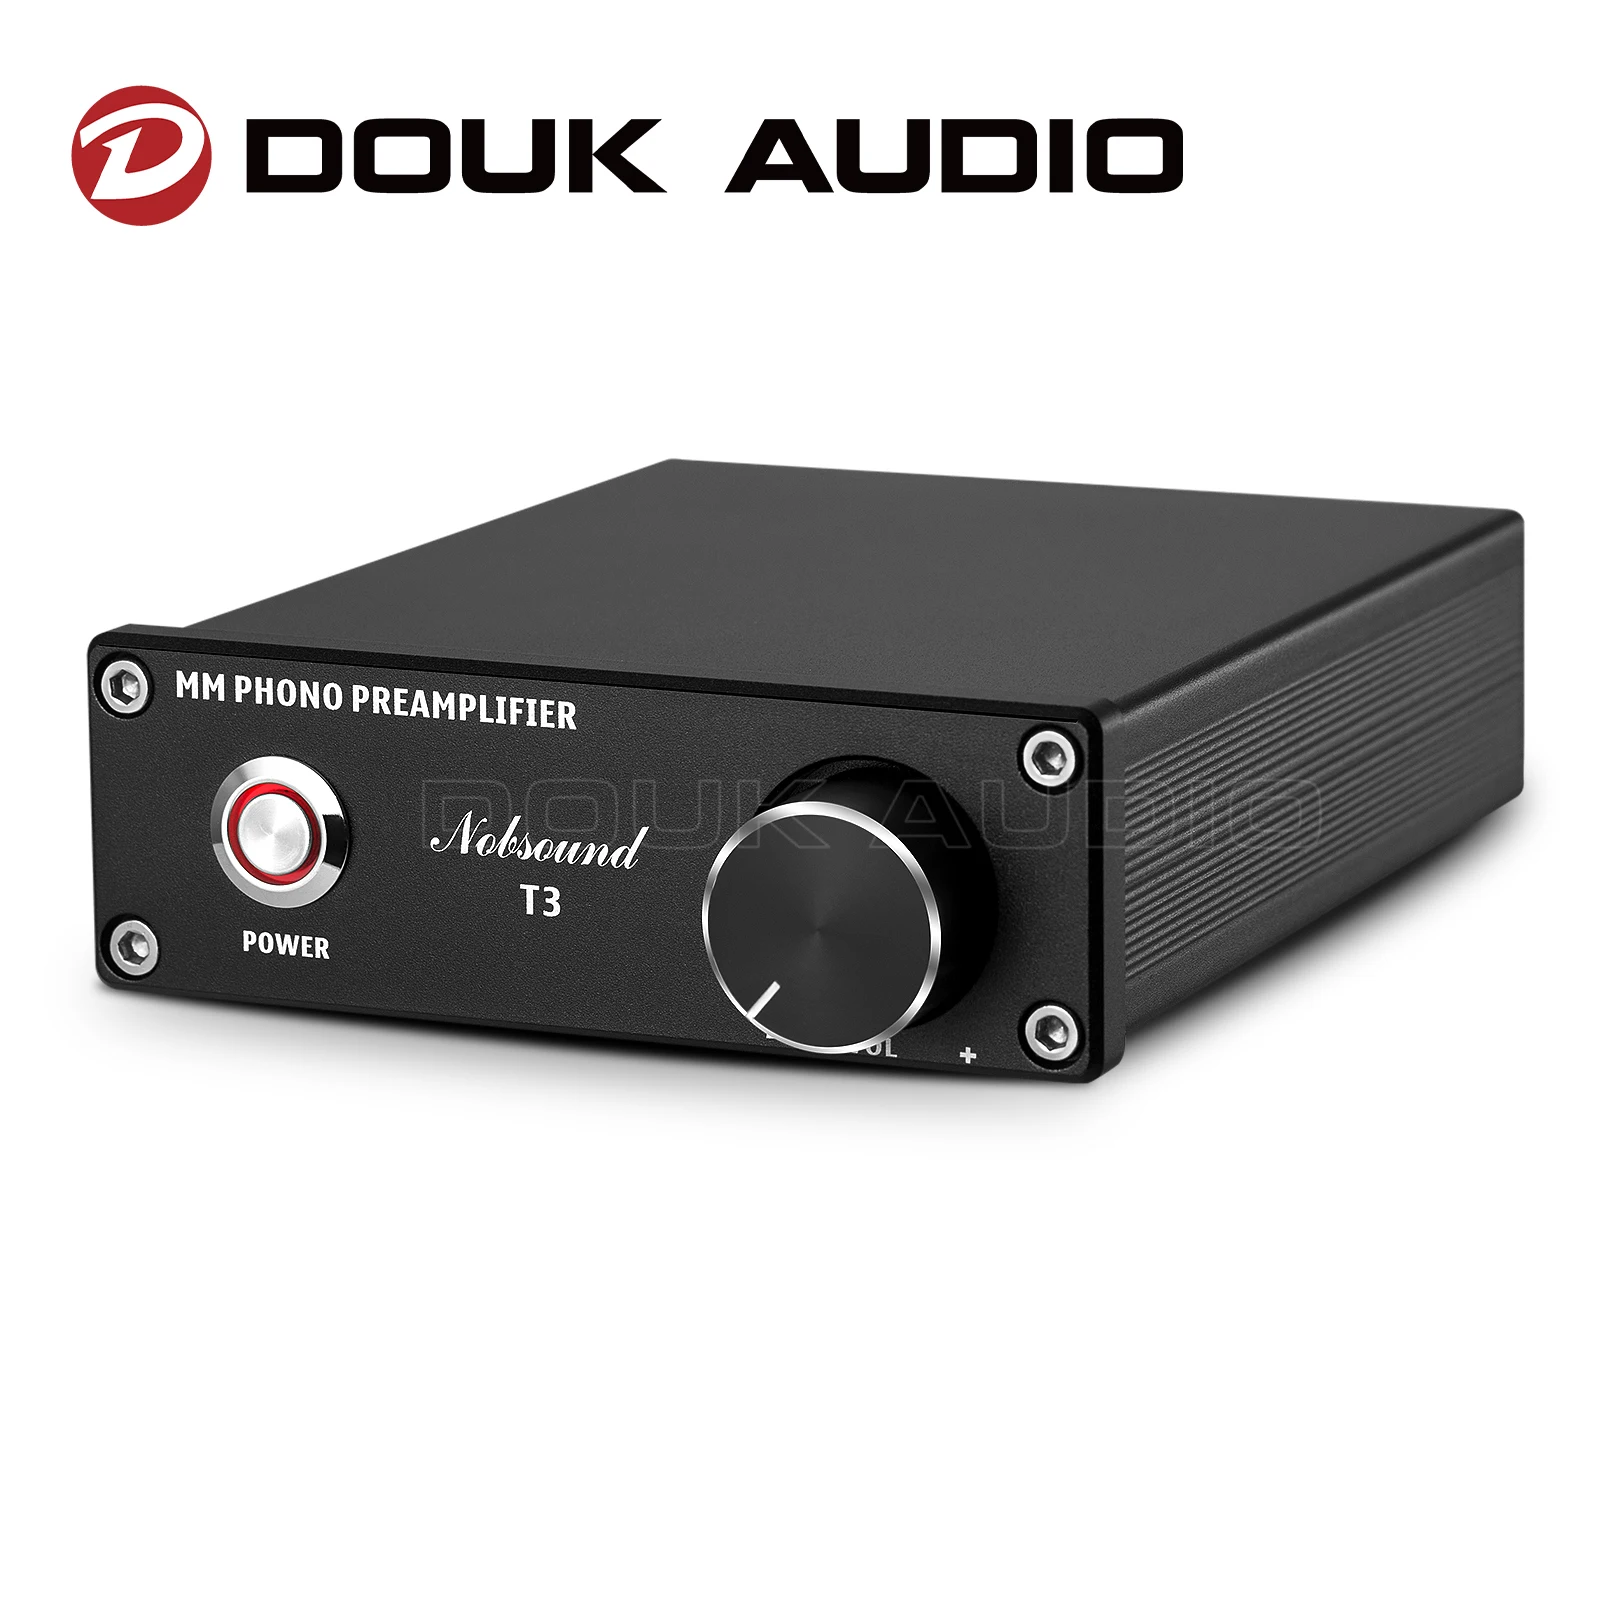 Douk Audio T3 HiFi MM RIAA Phonograph Preamplifier RIAA Home Record Player Phono Stage Preamp Turntable Amplifier Volume Control